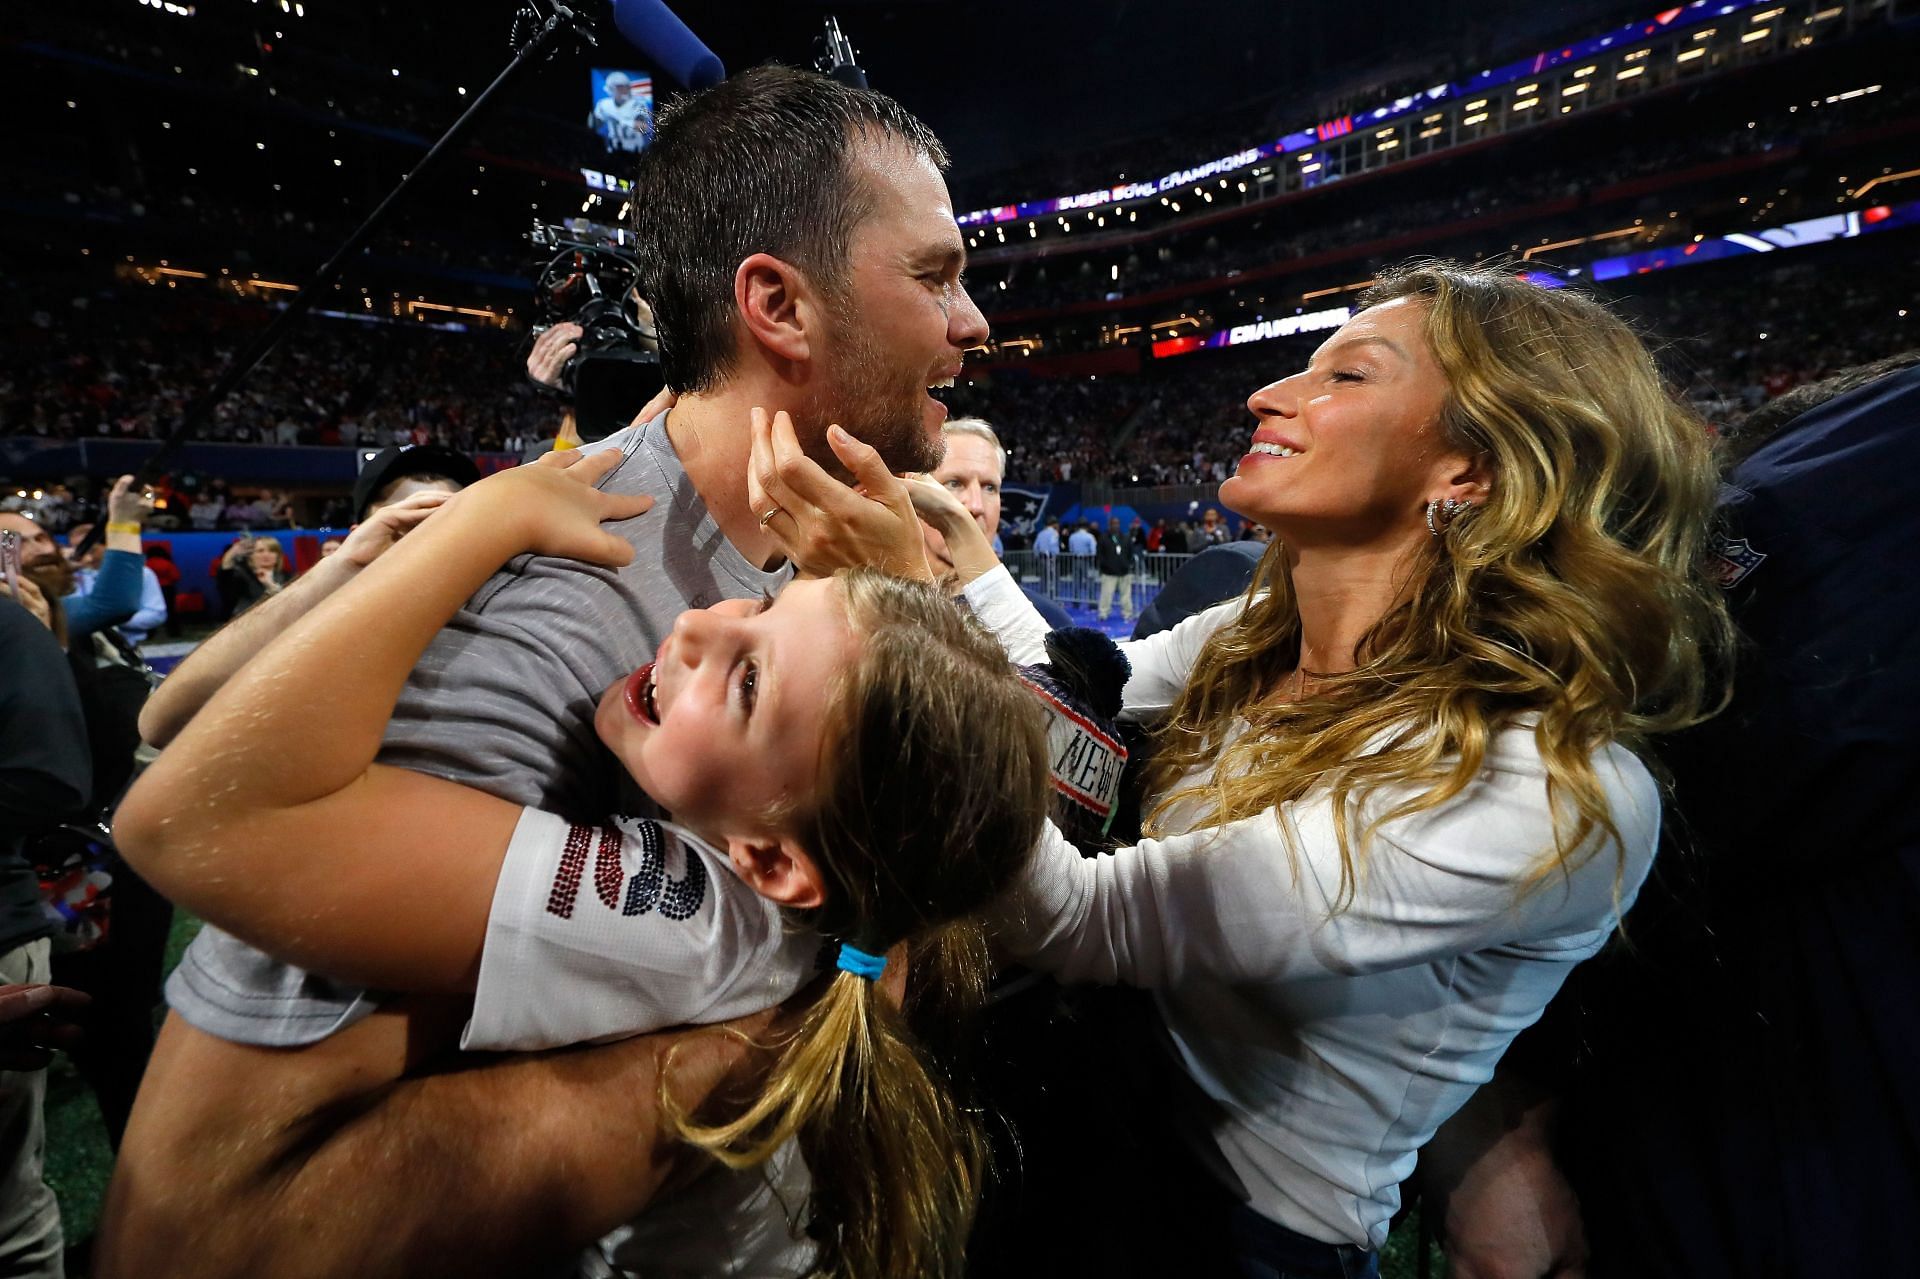 Tom Brady with his family following Super Bowl LIII - New England Patriots v Los Angeles Rams